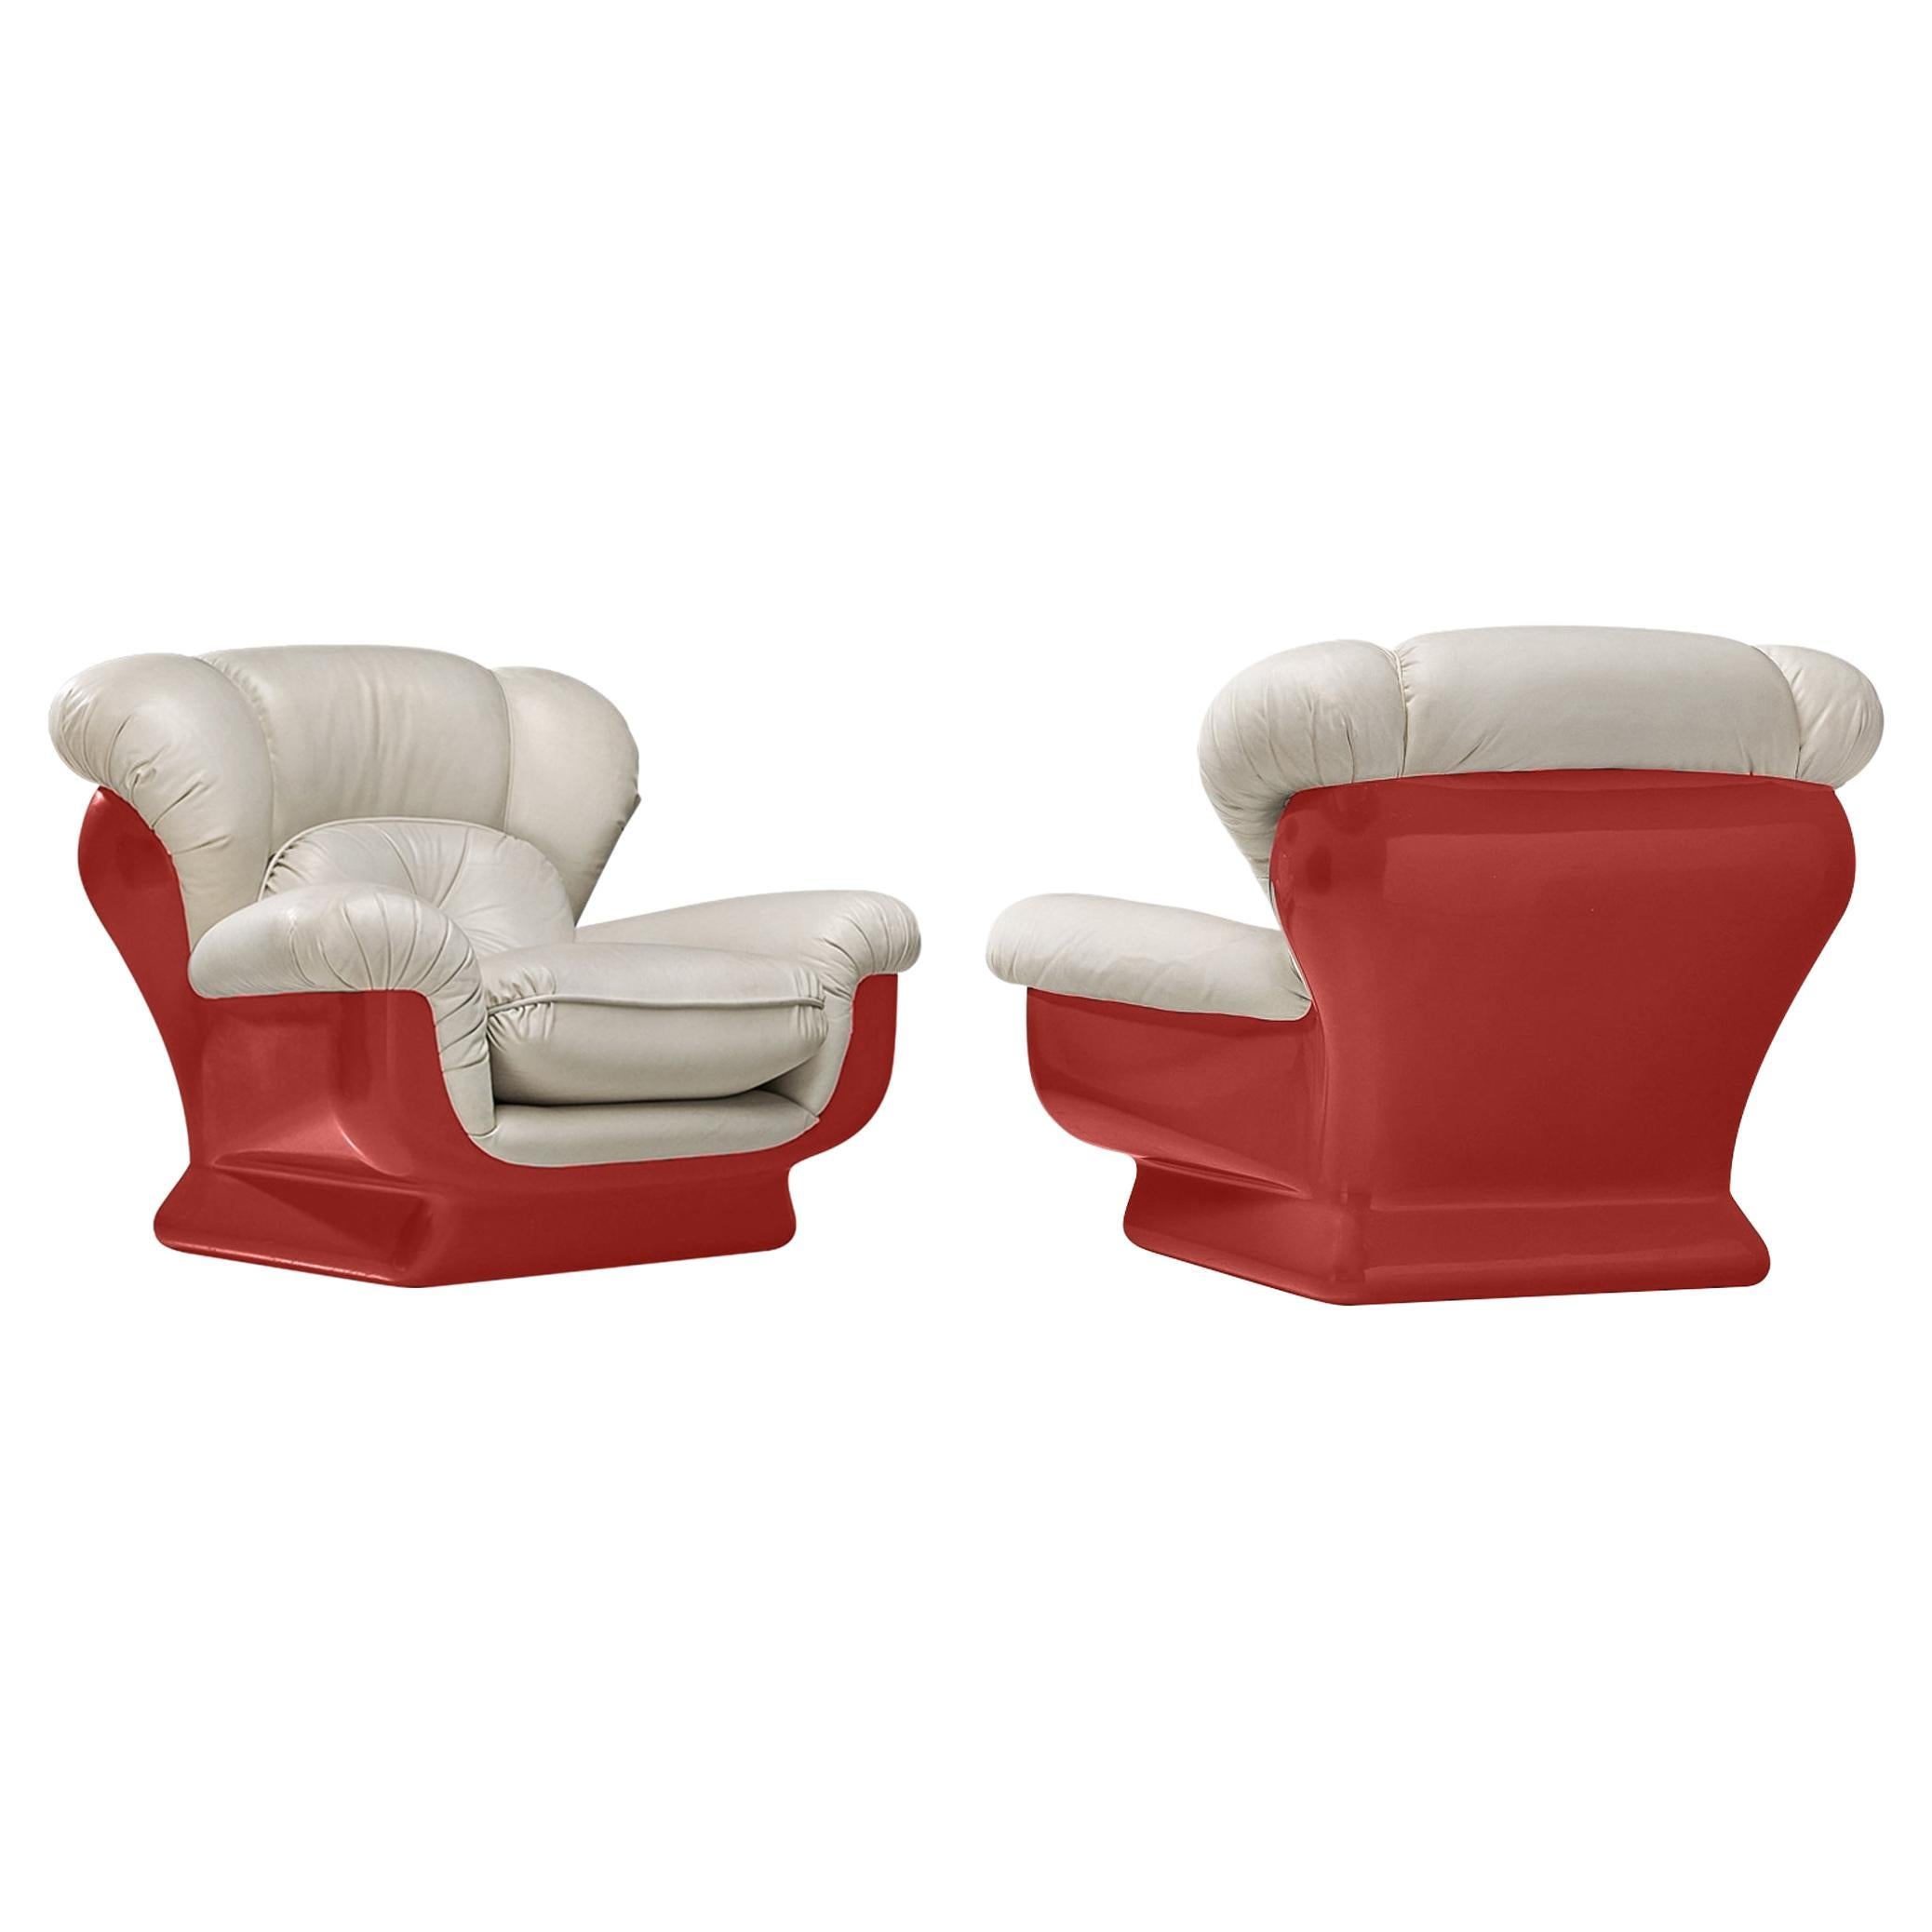 Italian Bulky Pair of Lounge Chairs in Red Fiberglass and Leatherette  For Sale